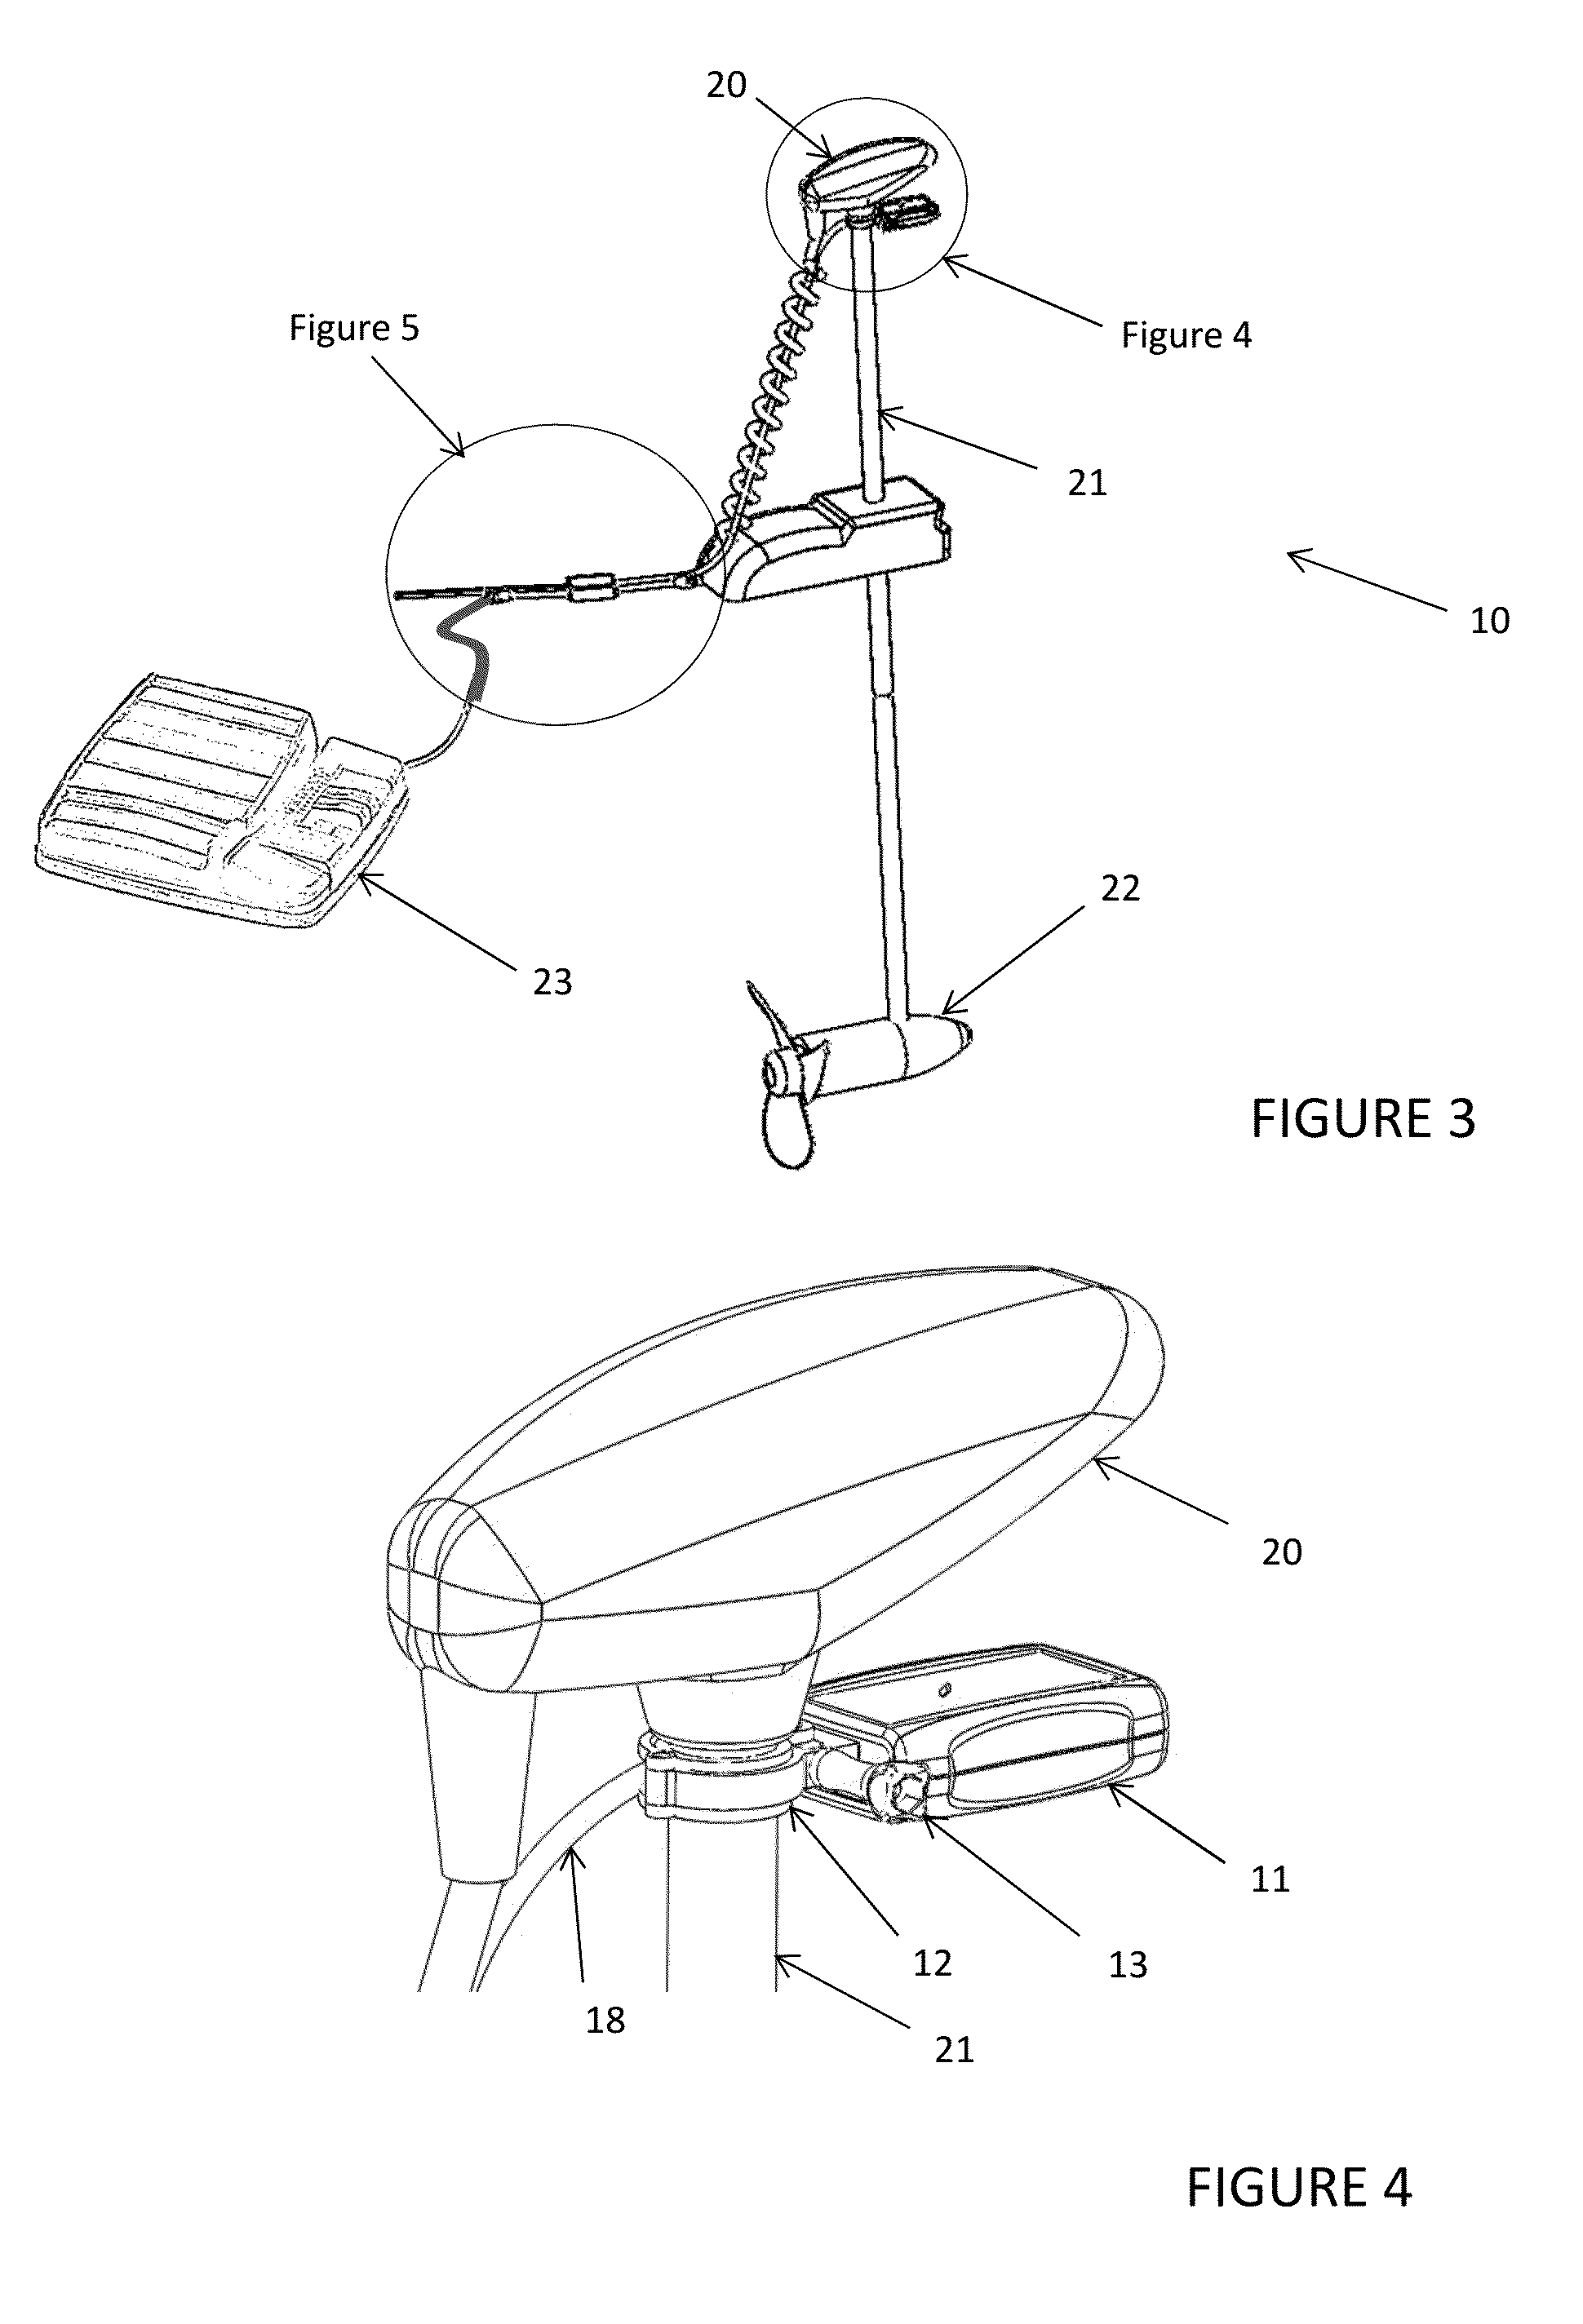 Networked architecture for a control system for a steerable thrusting device